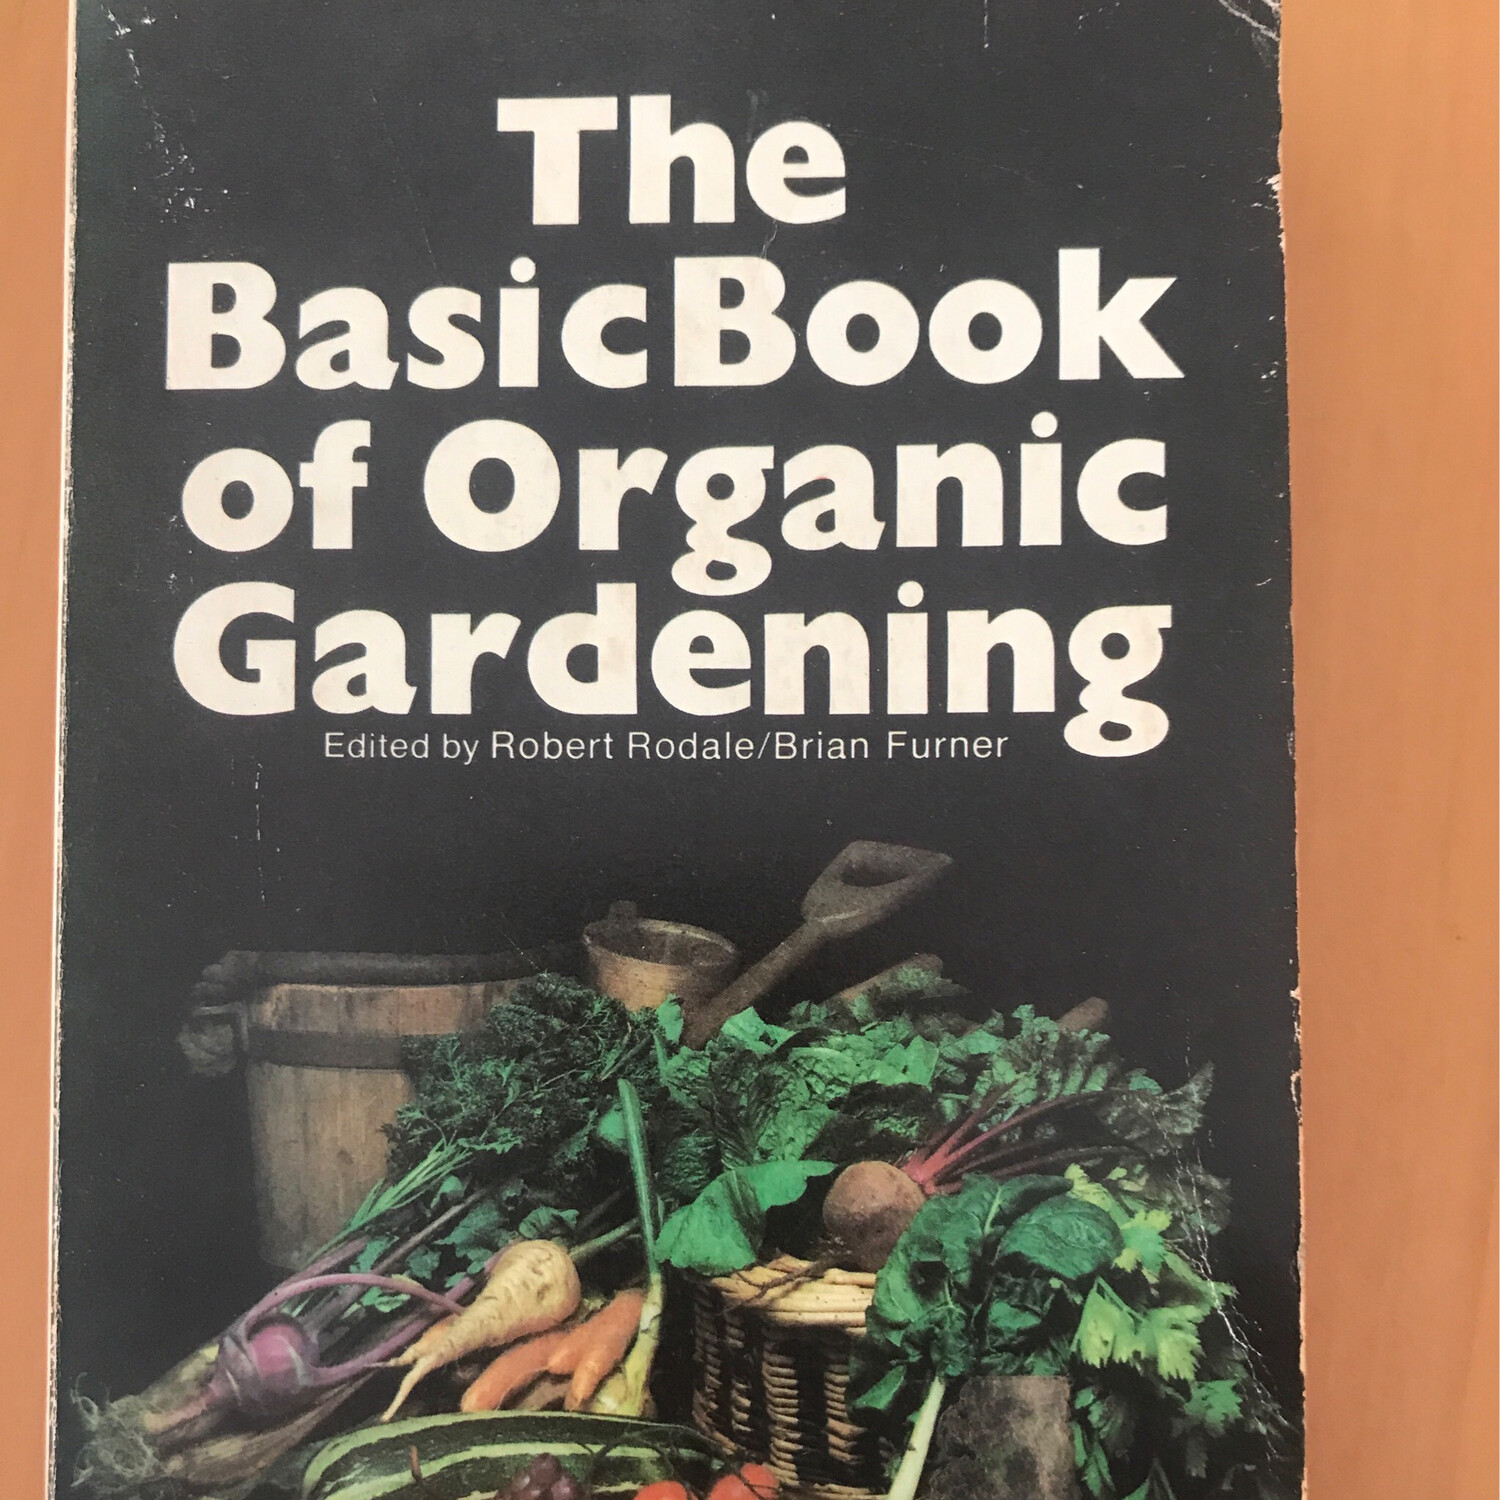 The Basic Book Of Organic Gardening, Edited By Robert Rodale And Brian Furner